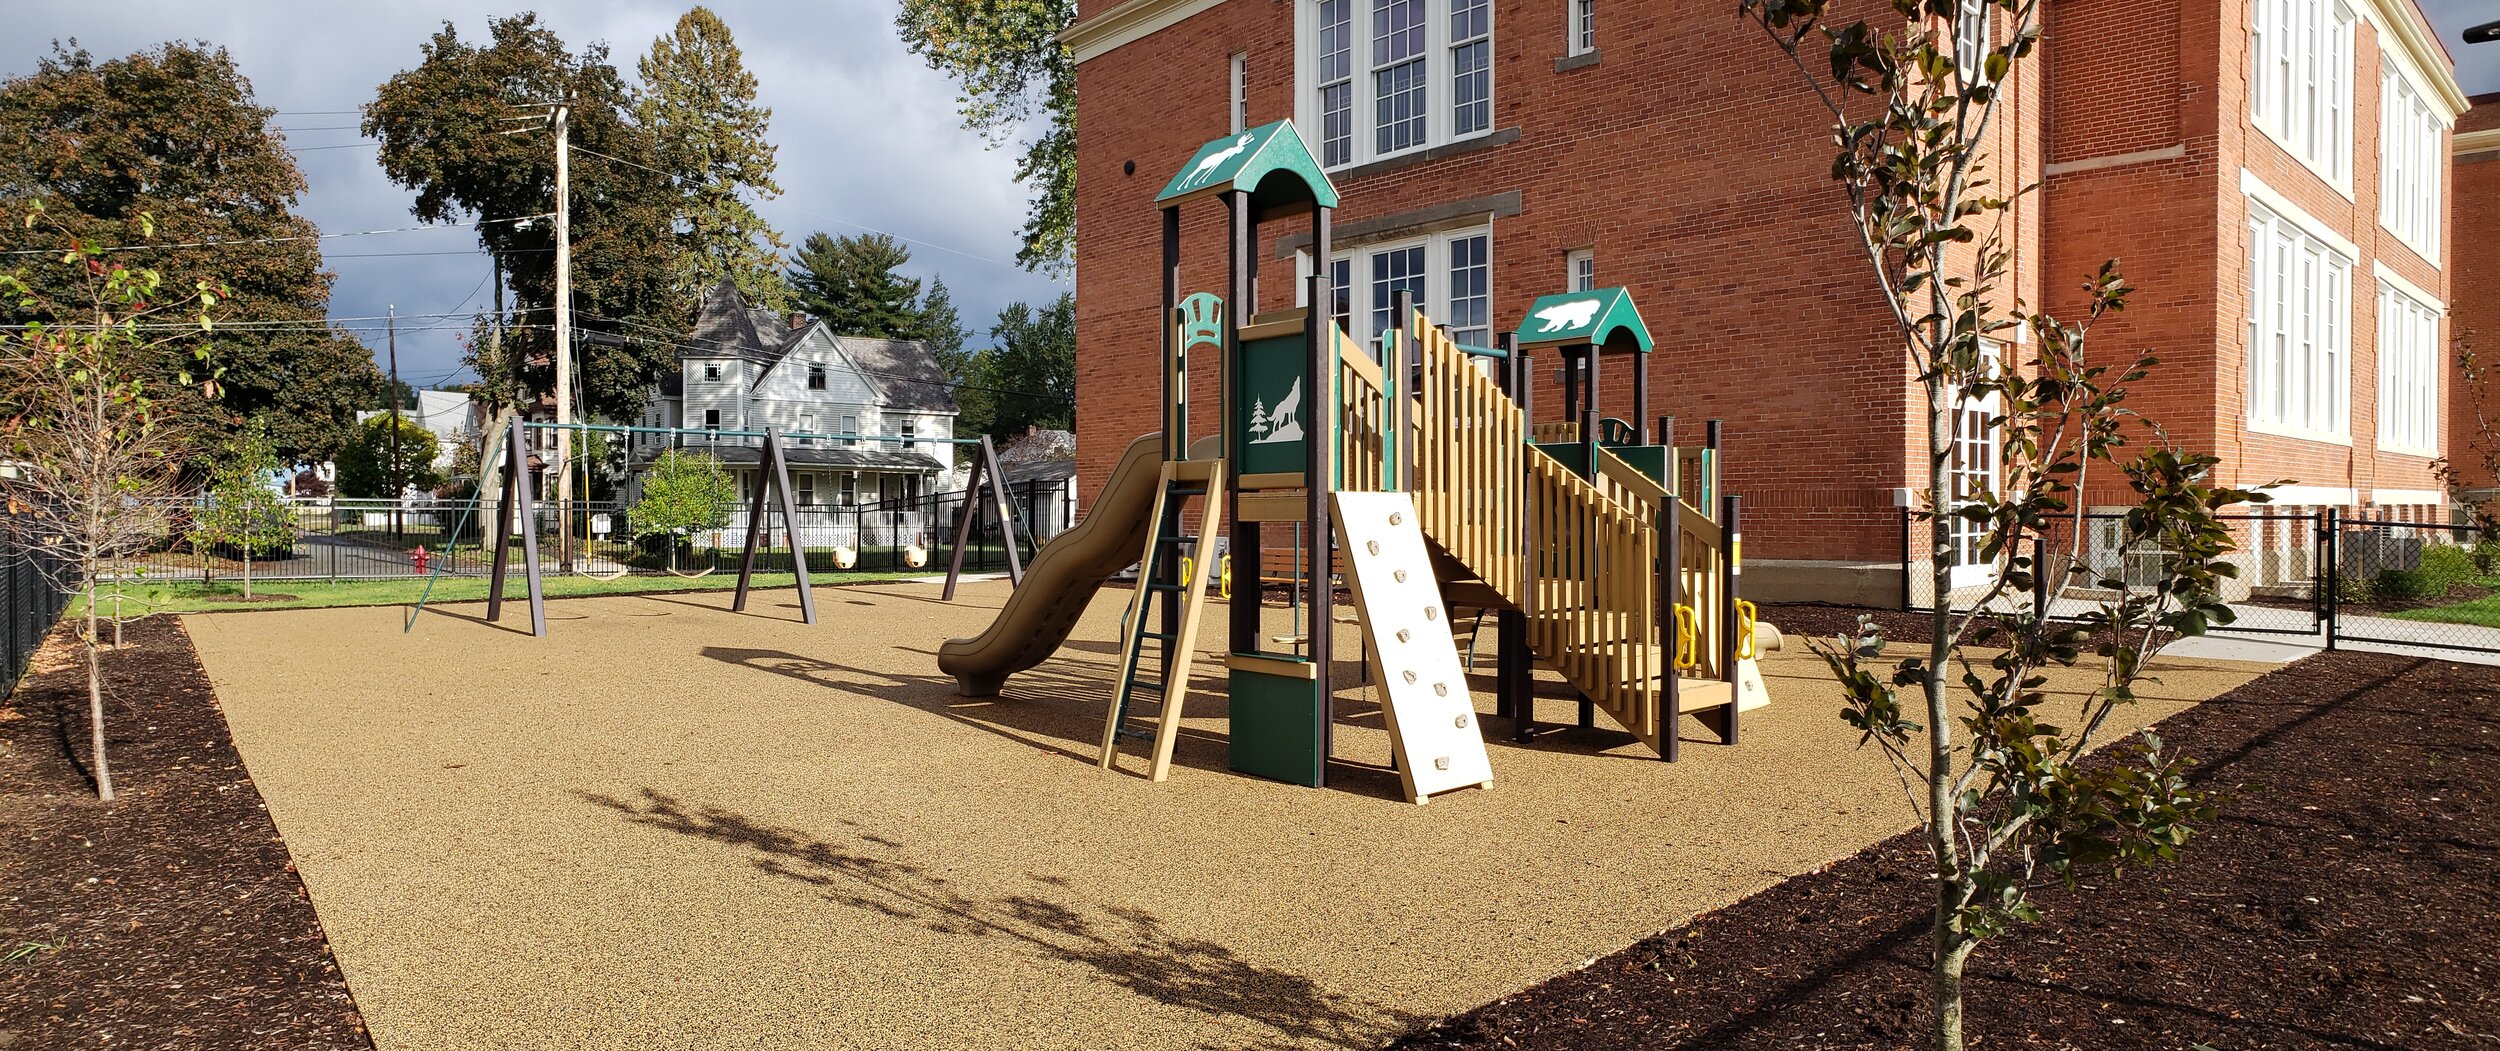 Mosely Street Apartments Playground 5.jpg